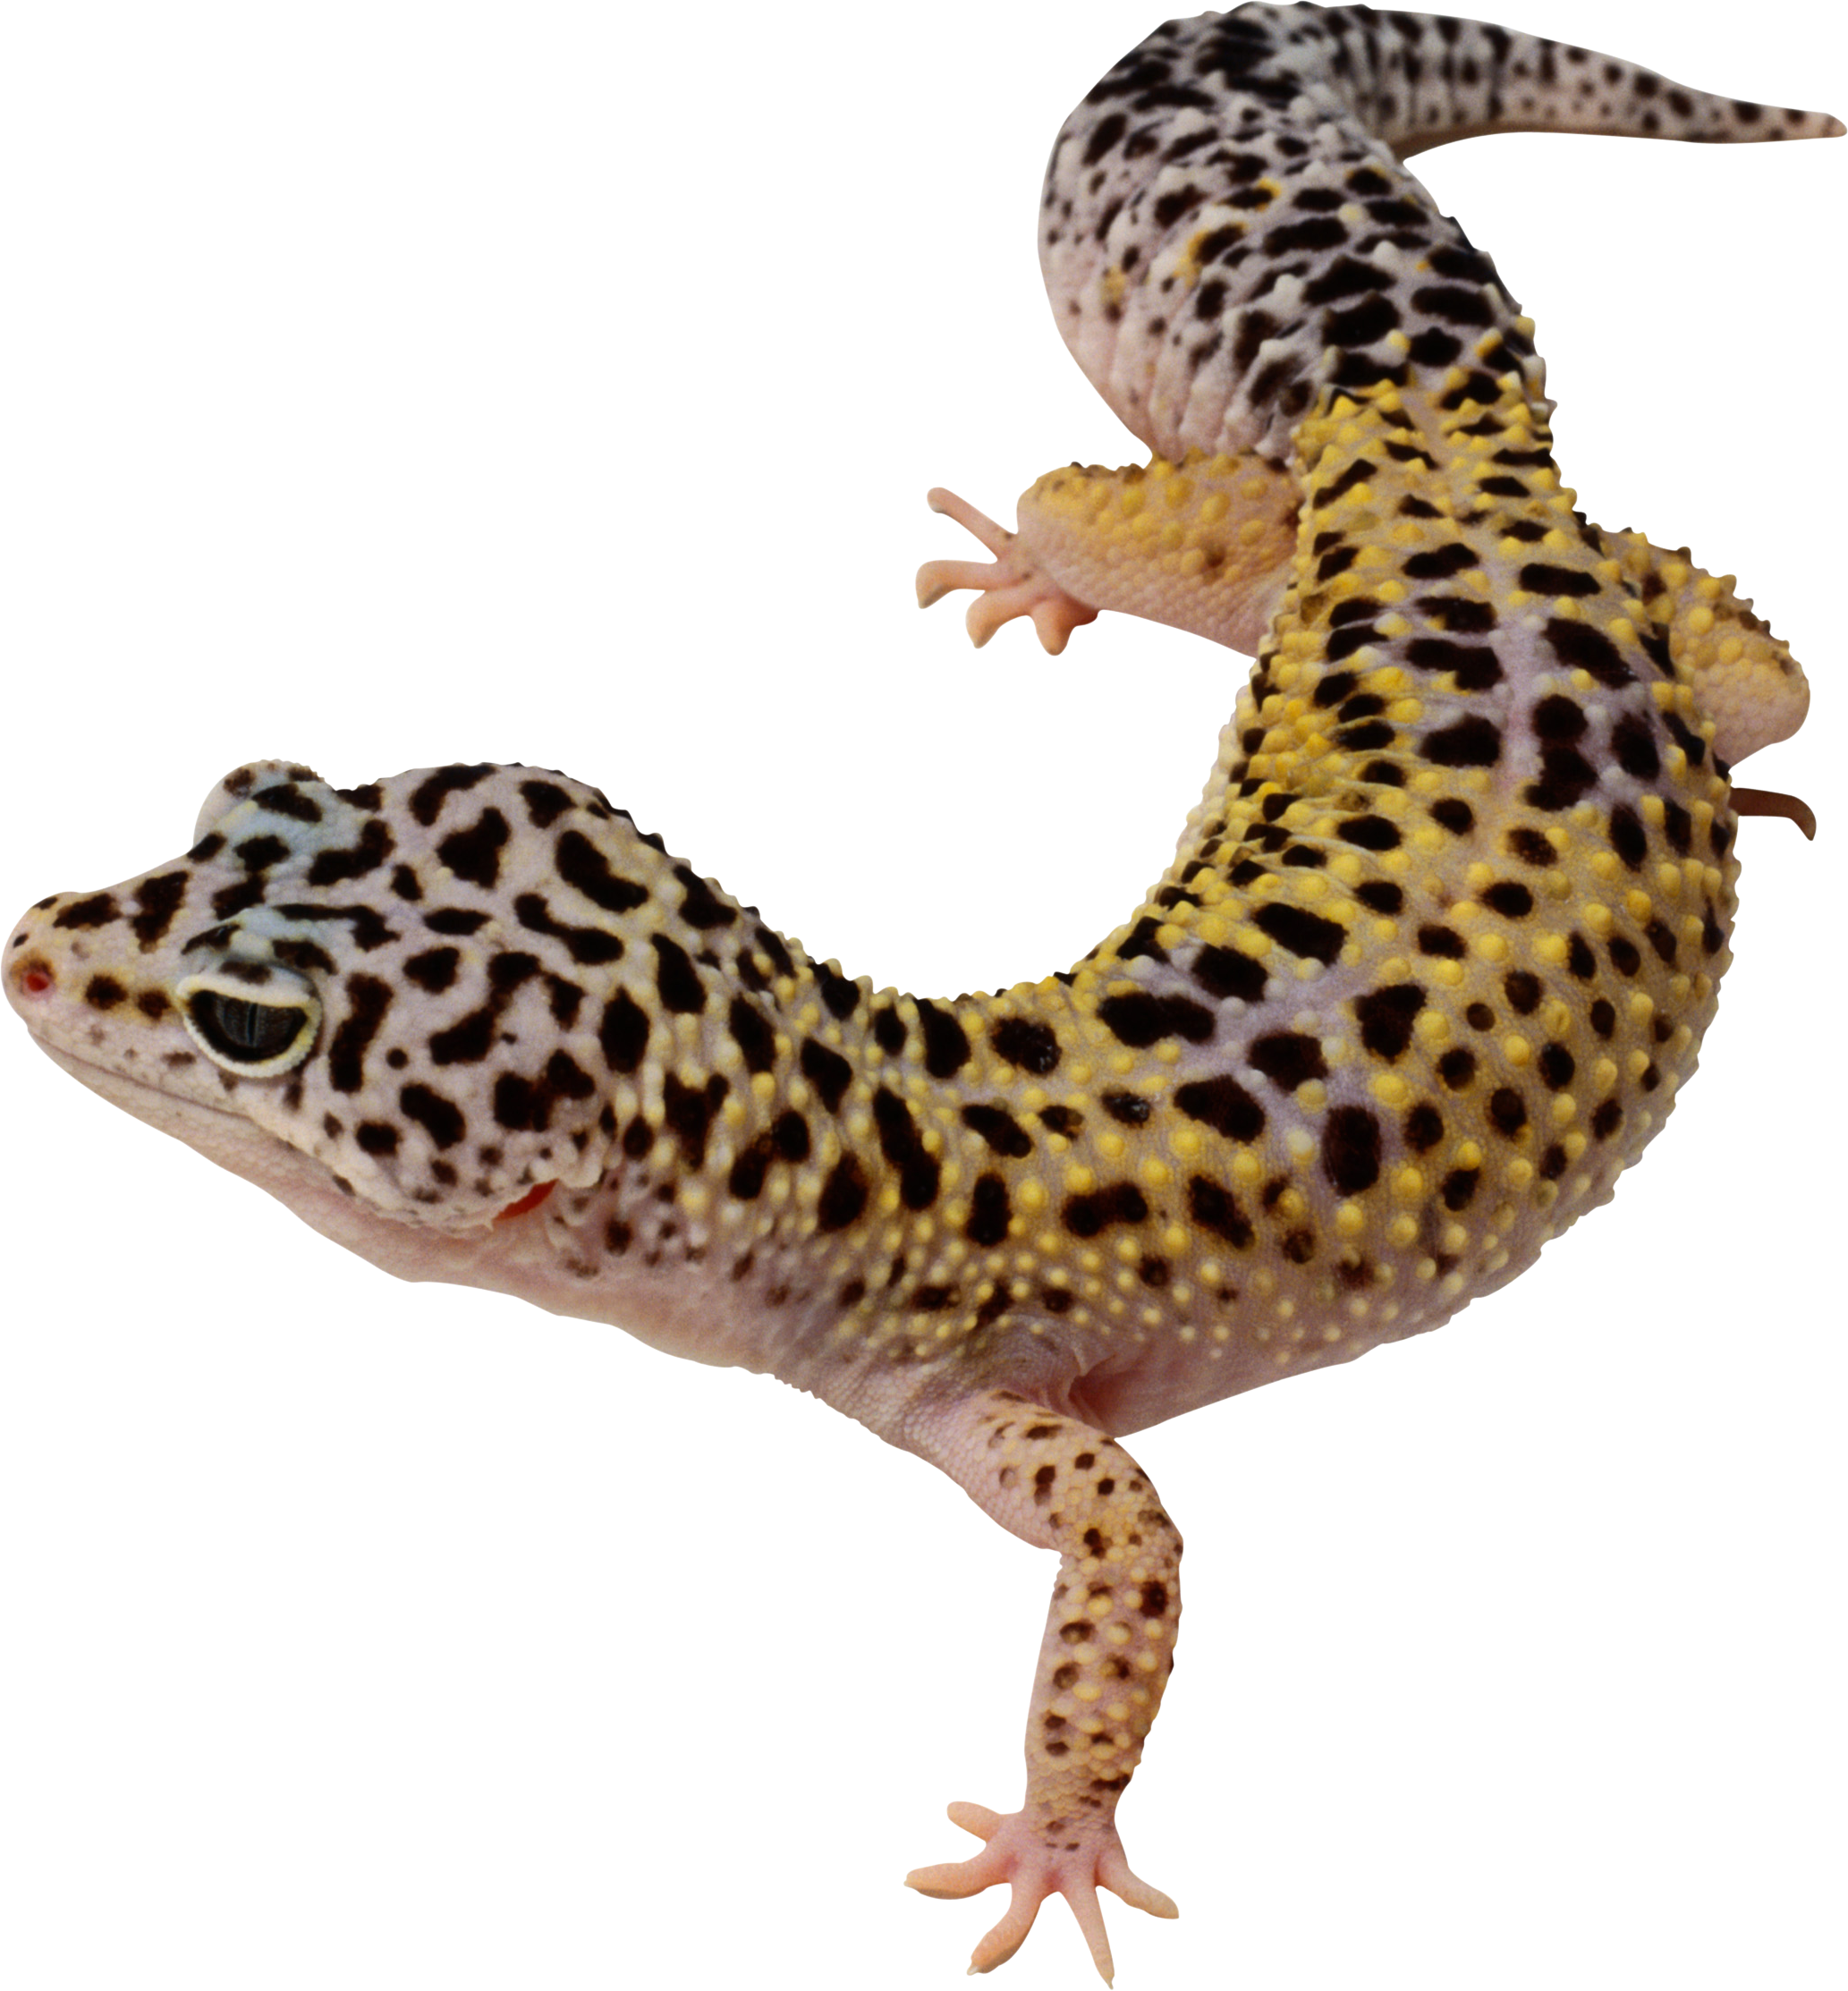 Lizard clipart reptile amphibian. Png images free download